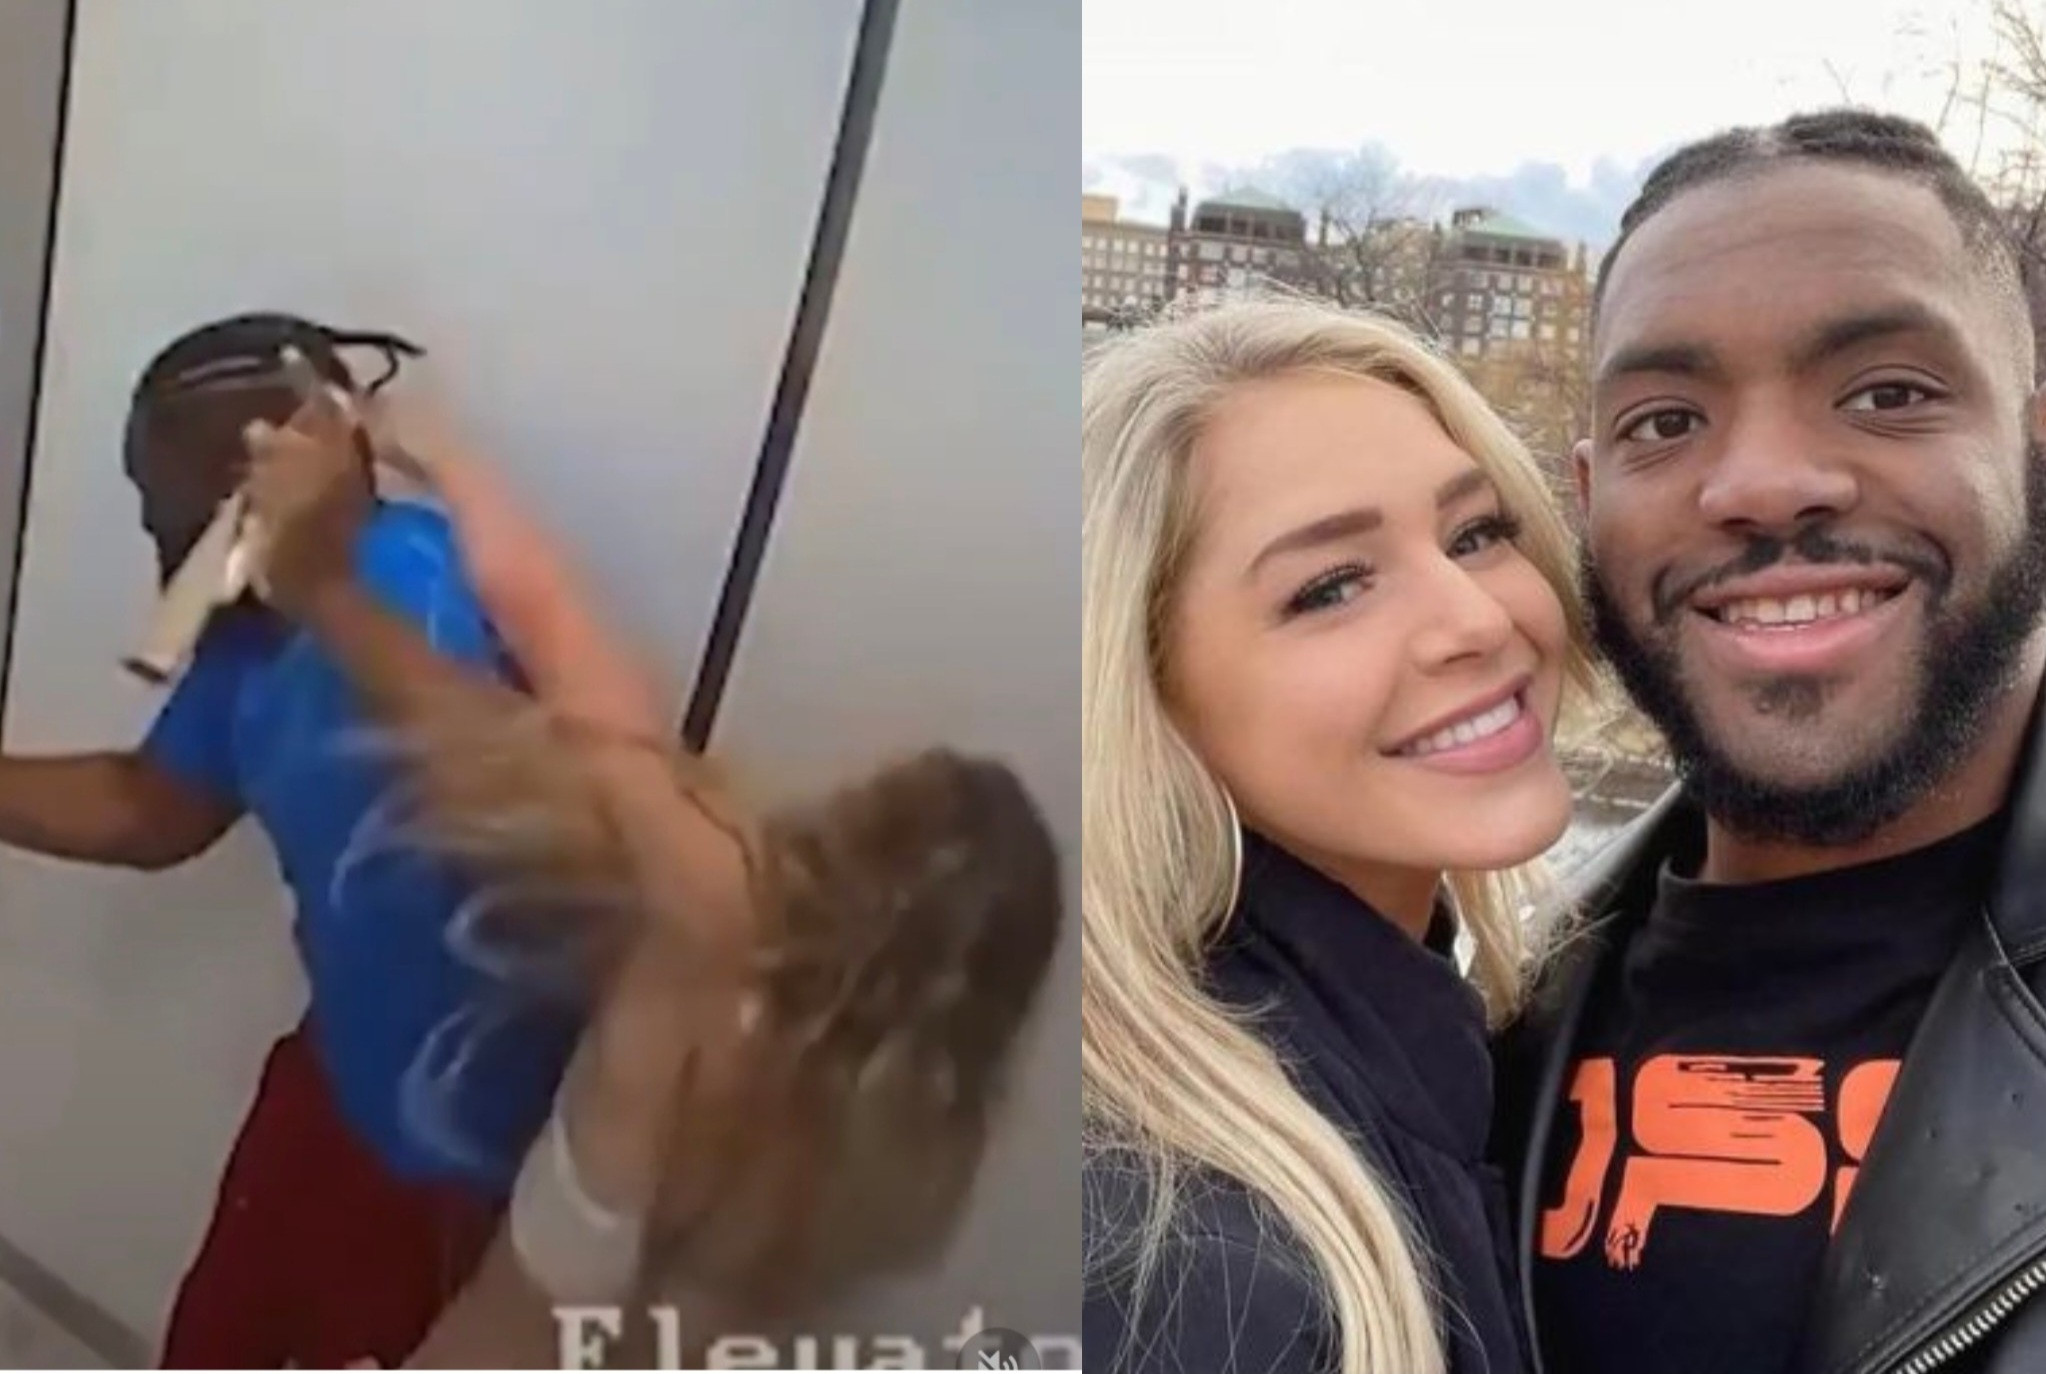 See video of Onlyfans model, Courtney Clenney attacking Nigerian-American boyfriend Christian Obumseli in elevator months before she murdered him